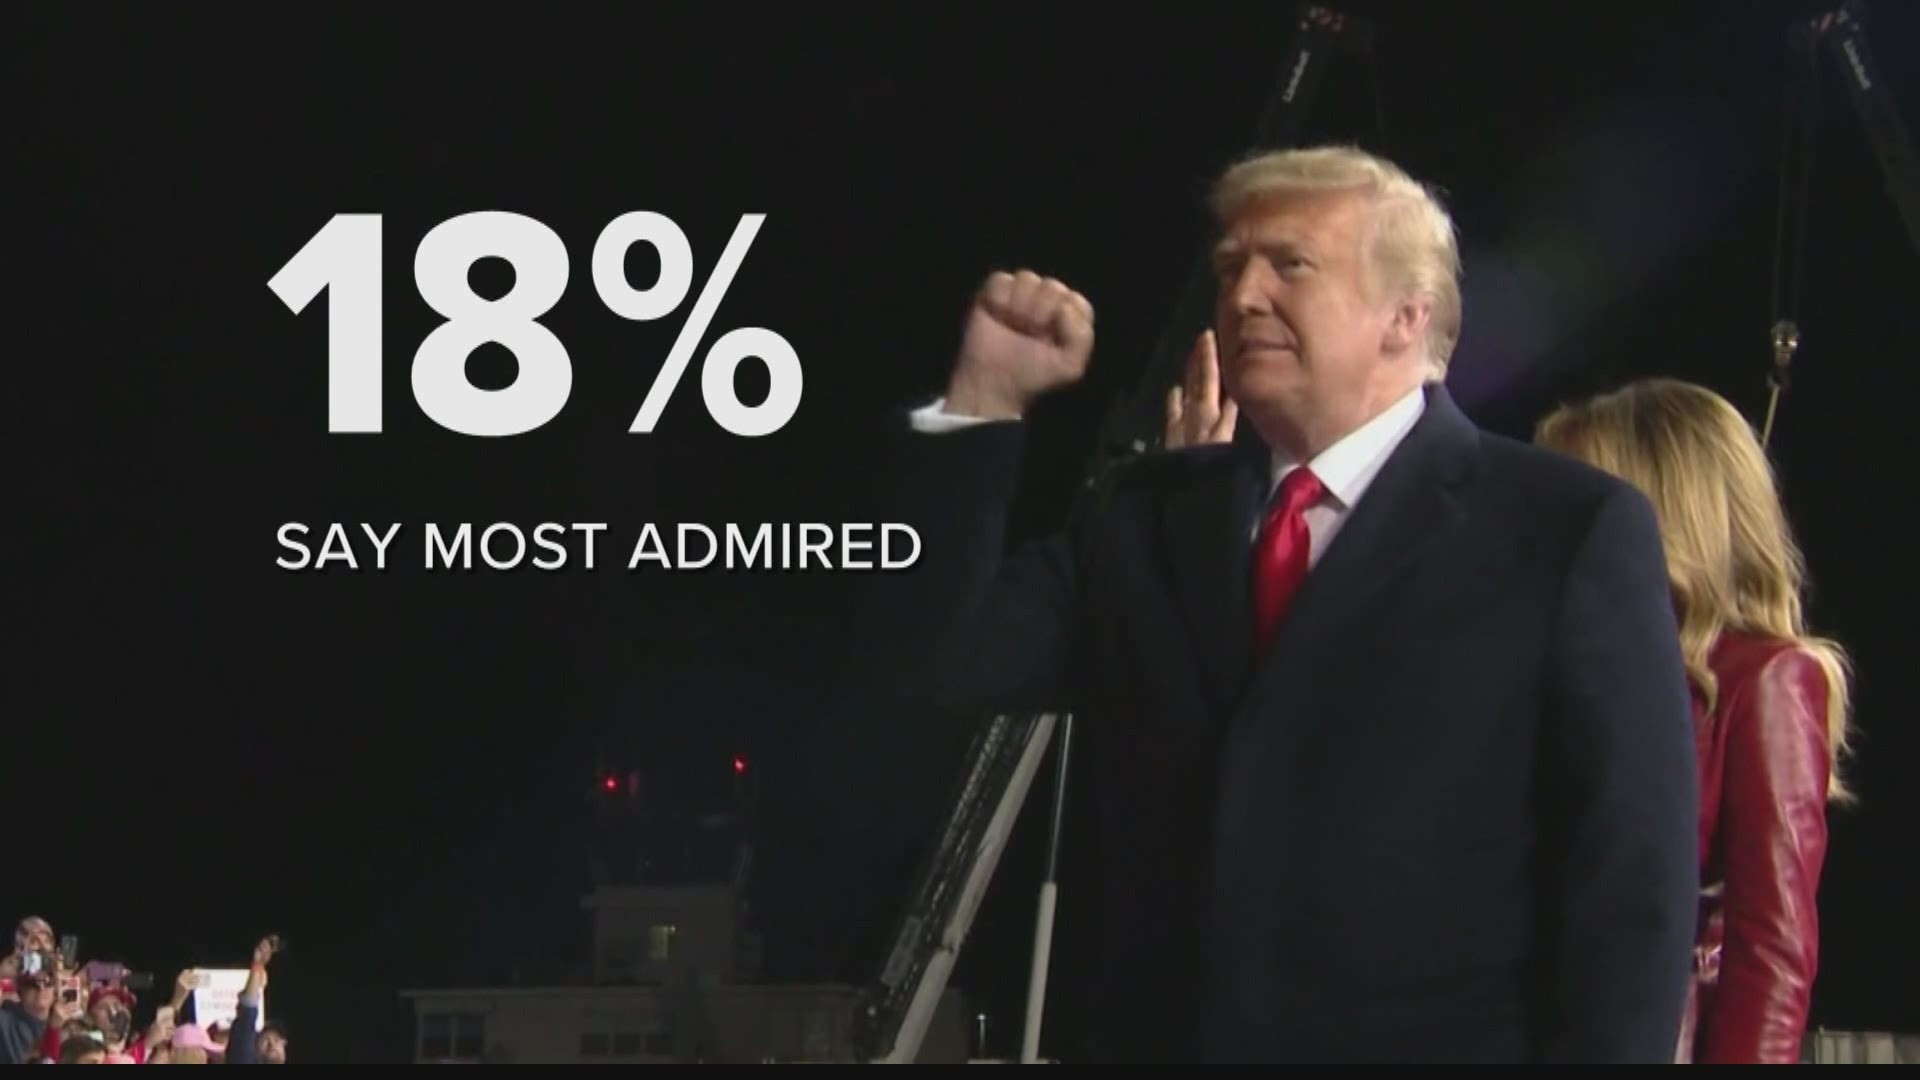 Gallup says Trump finished at the top of the list this year.